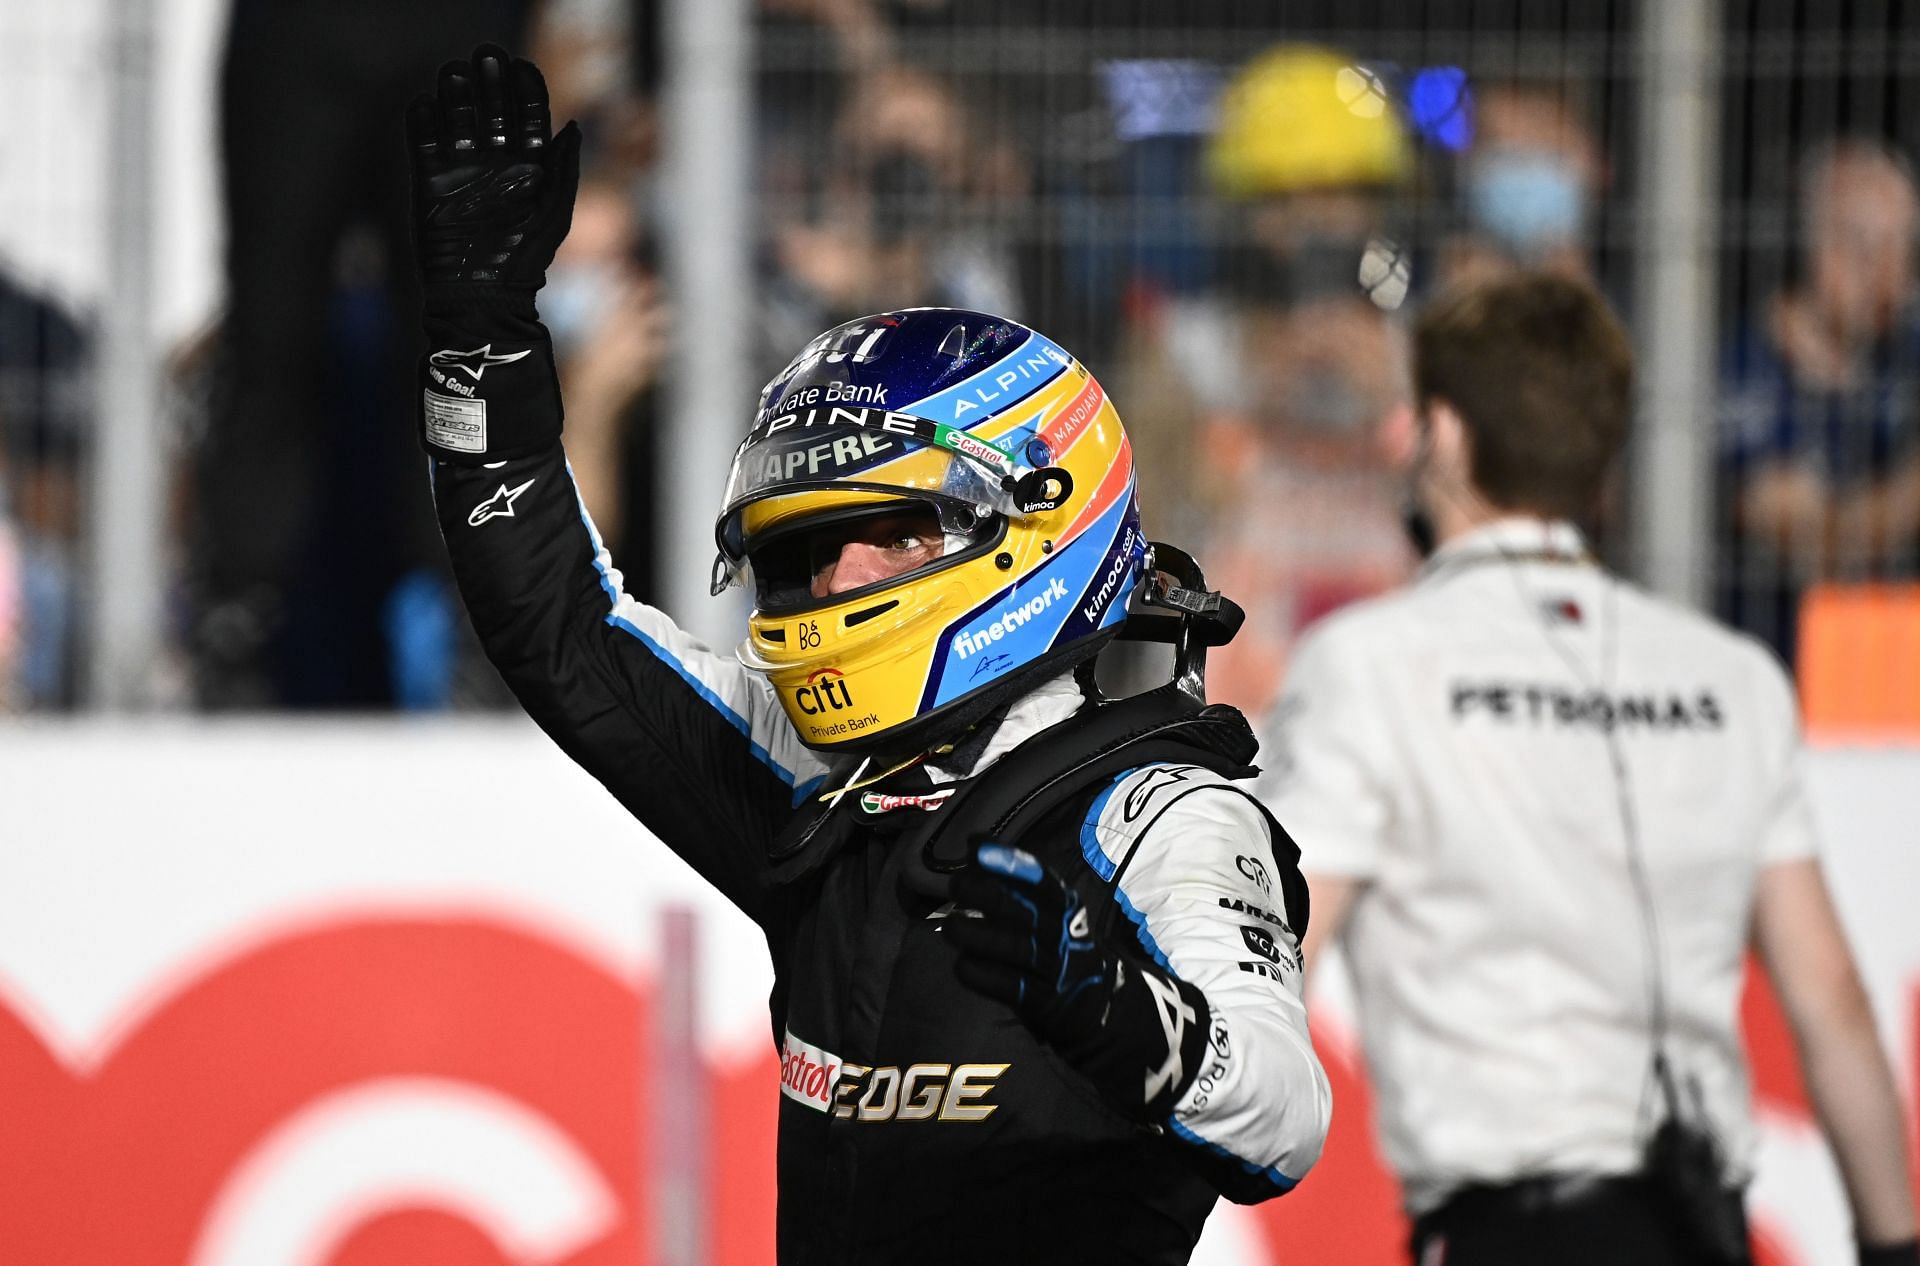 Fernando Alonso returned to the F1 podium after 7 years, in the 2021 Qatar GP